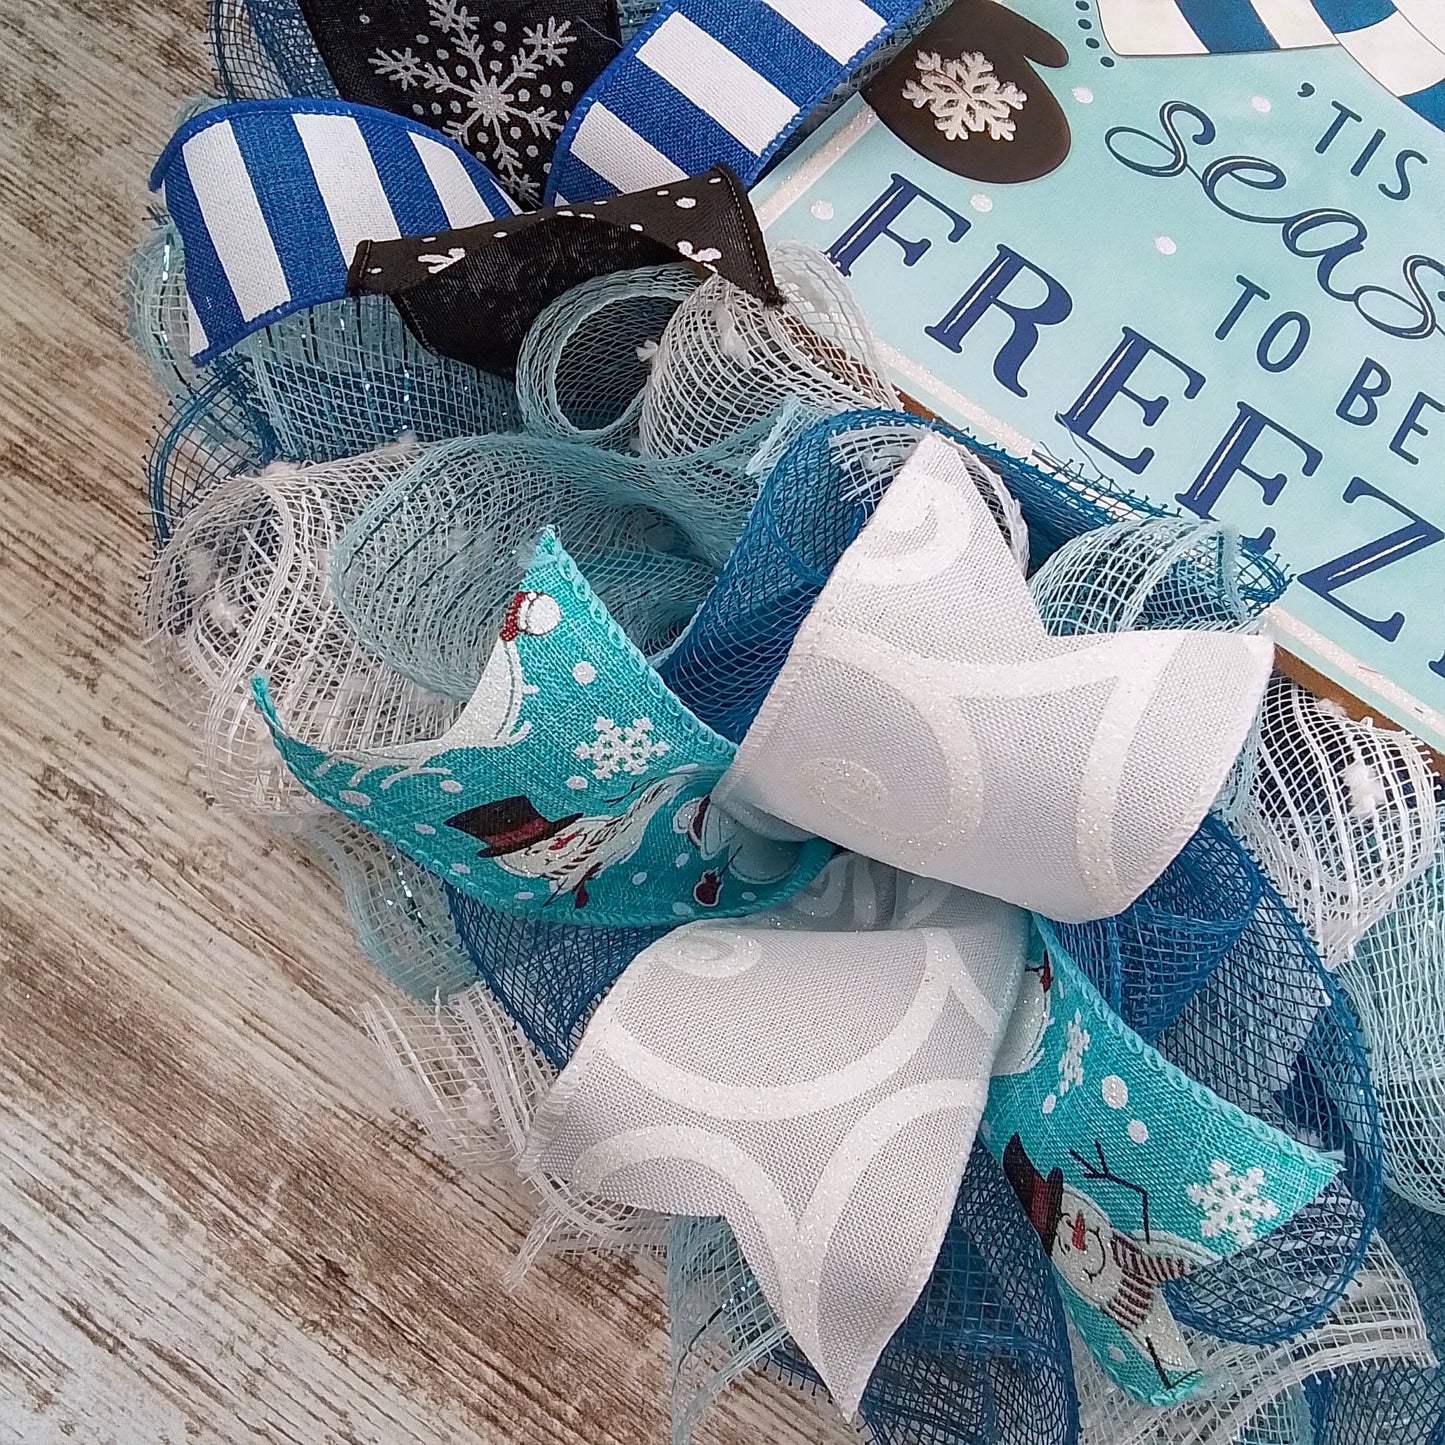 Freezin Winter Snowman Wreaths - Blue Cold Front Door Wreath - Outdoor Christmas Decor - White Turquoise Blue Silver